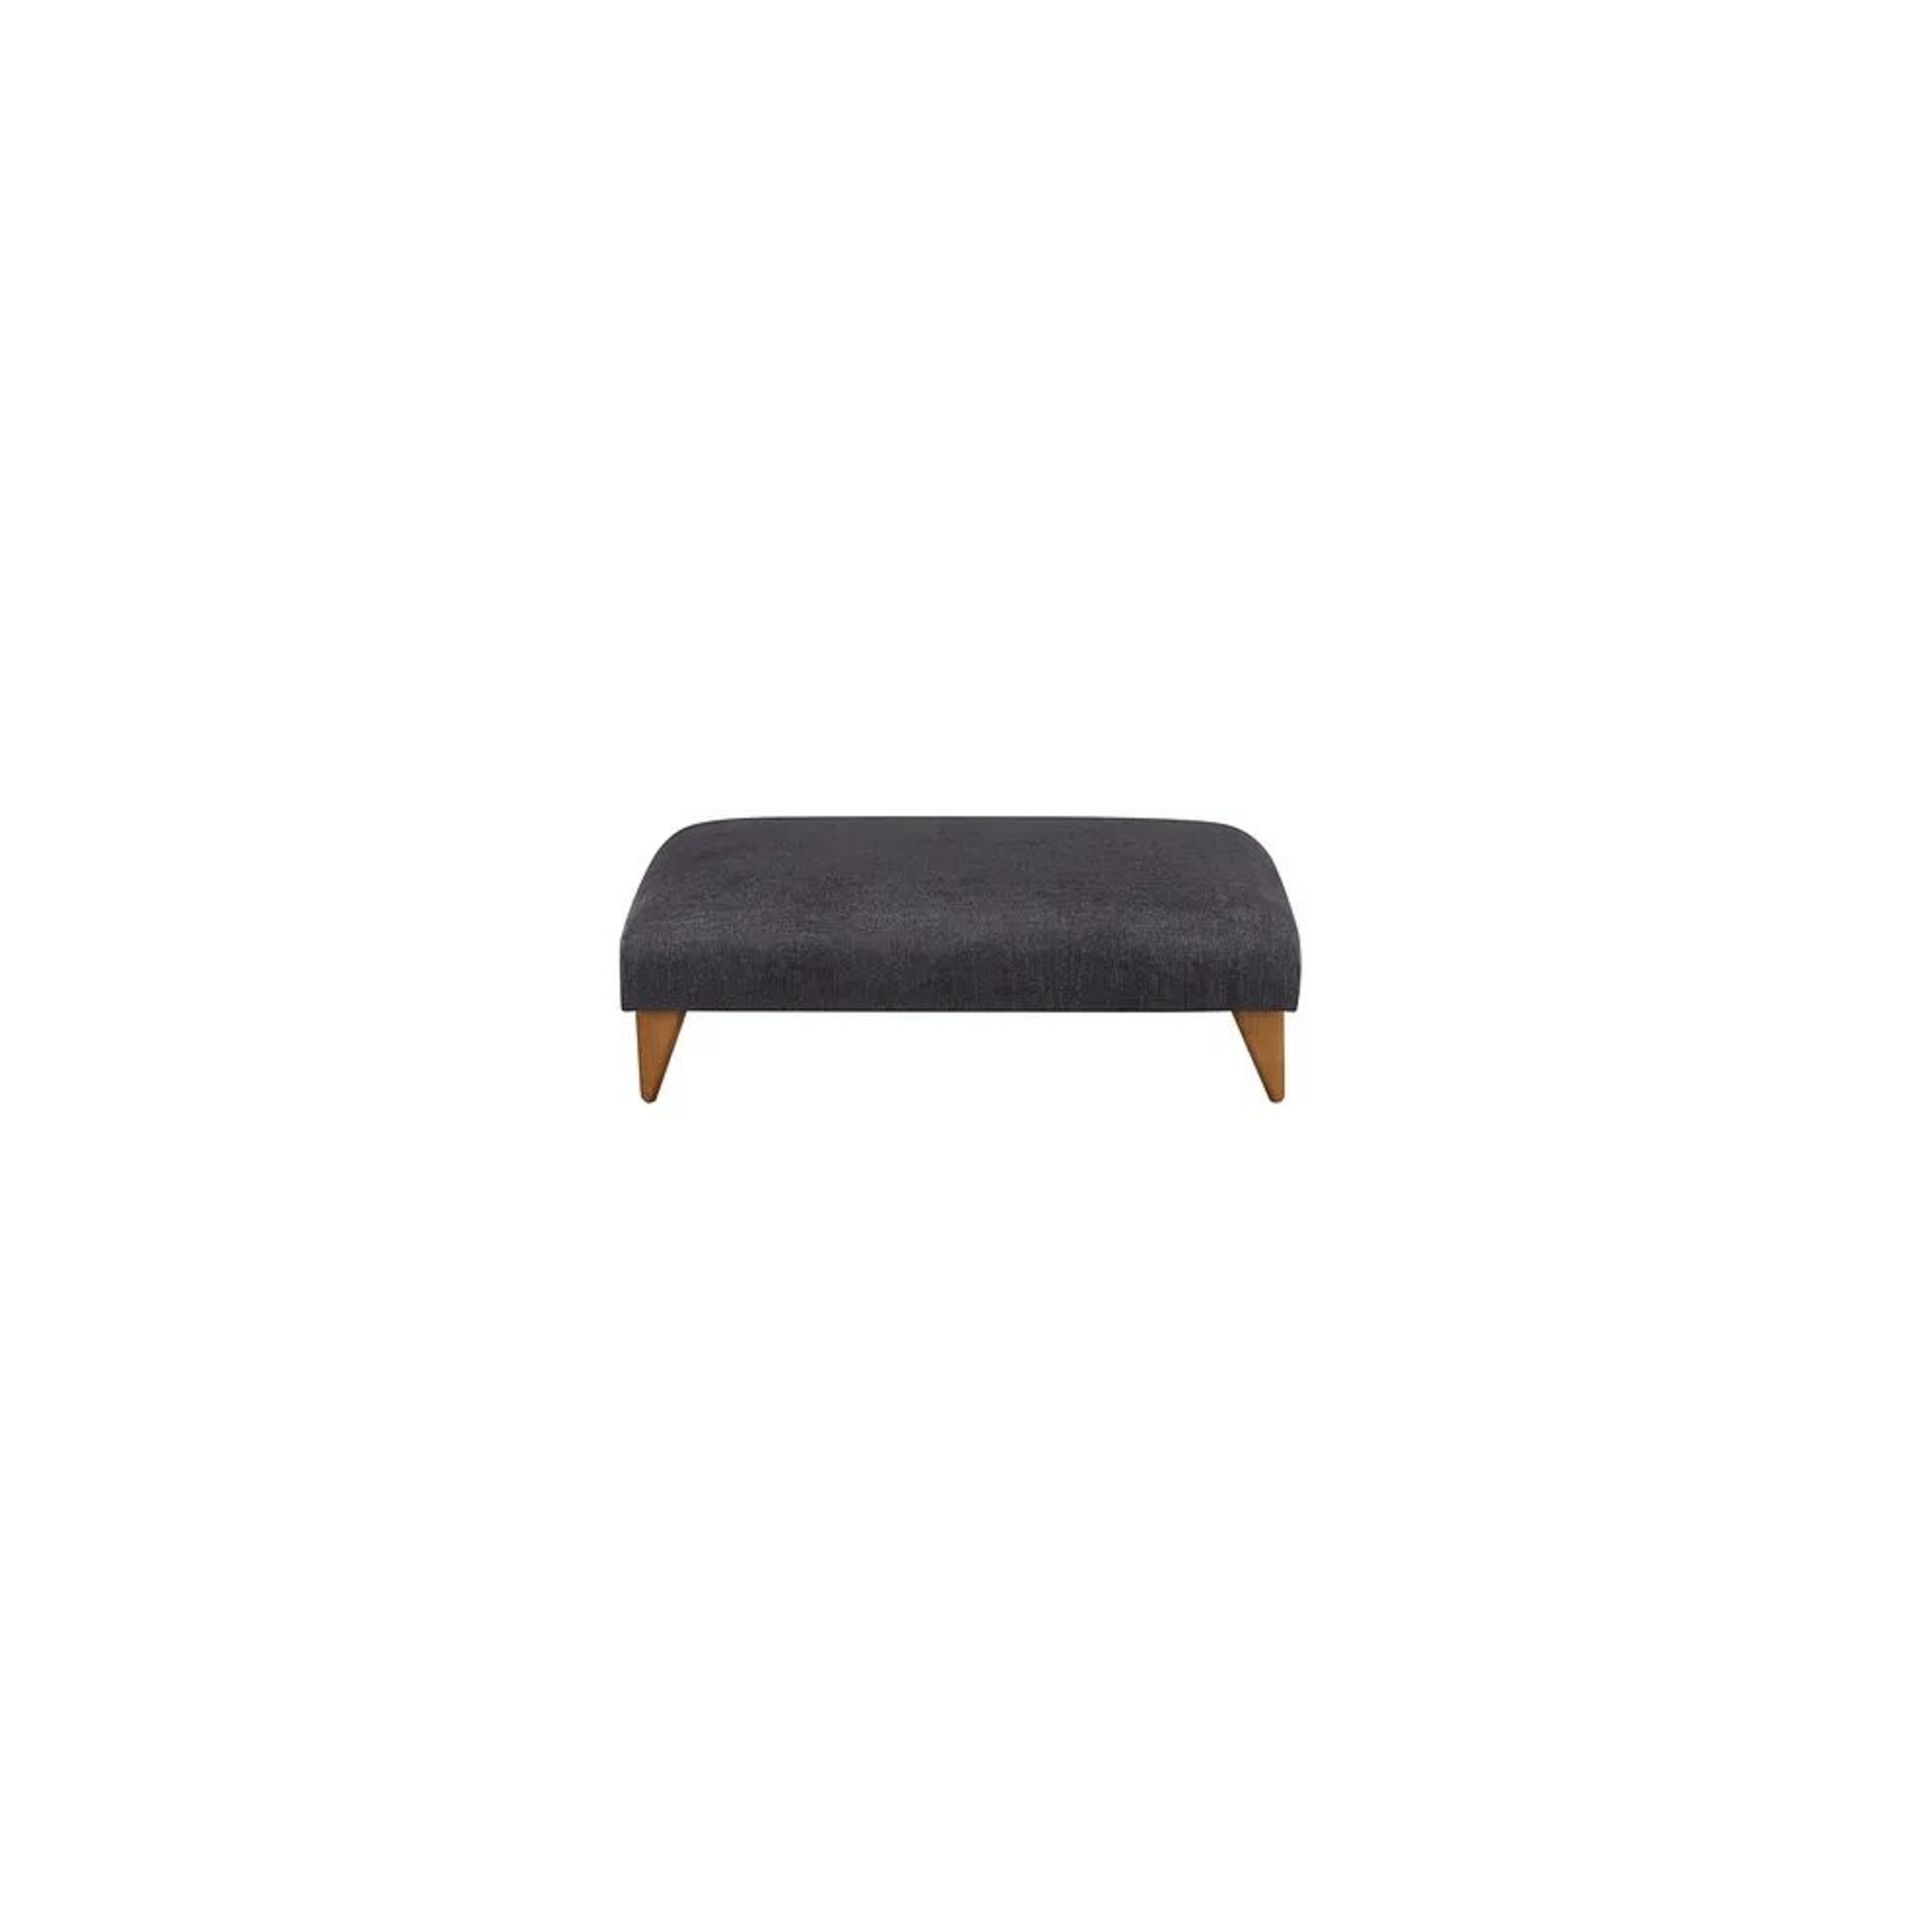 BRAND NEW JASMINE Footstool - ORKNEY GRAPHITE FABRIC. RRP £349. Built with a sturdy hardwood frame - Image 2 of 4